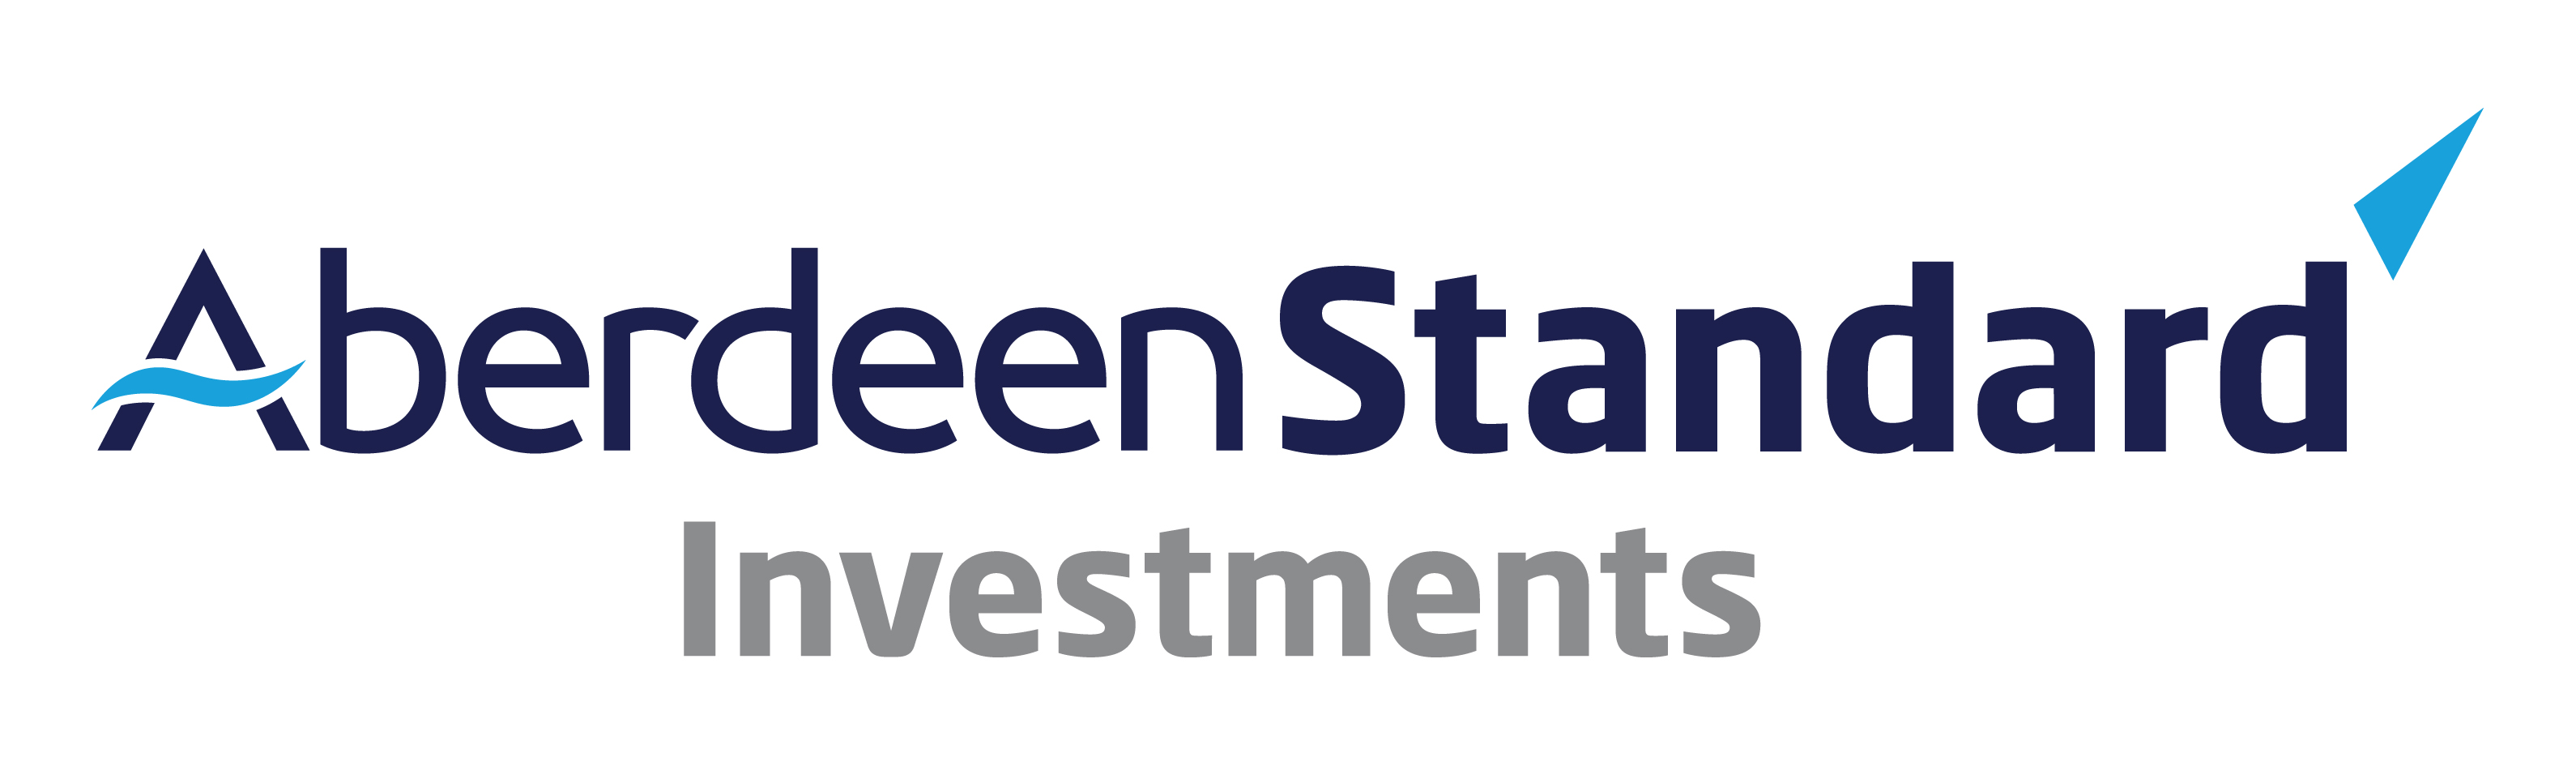 Aberdeen Standard Investments Inc., Friday, September 24, 2021, Press release picture